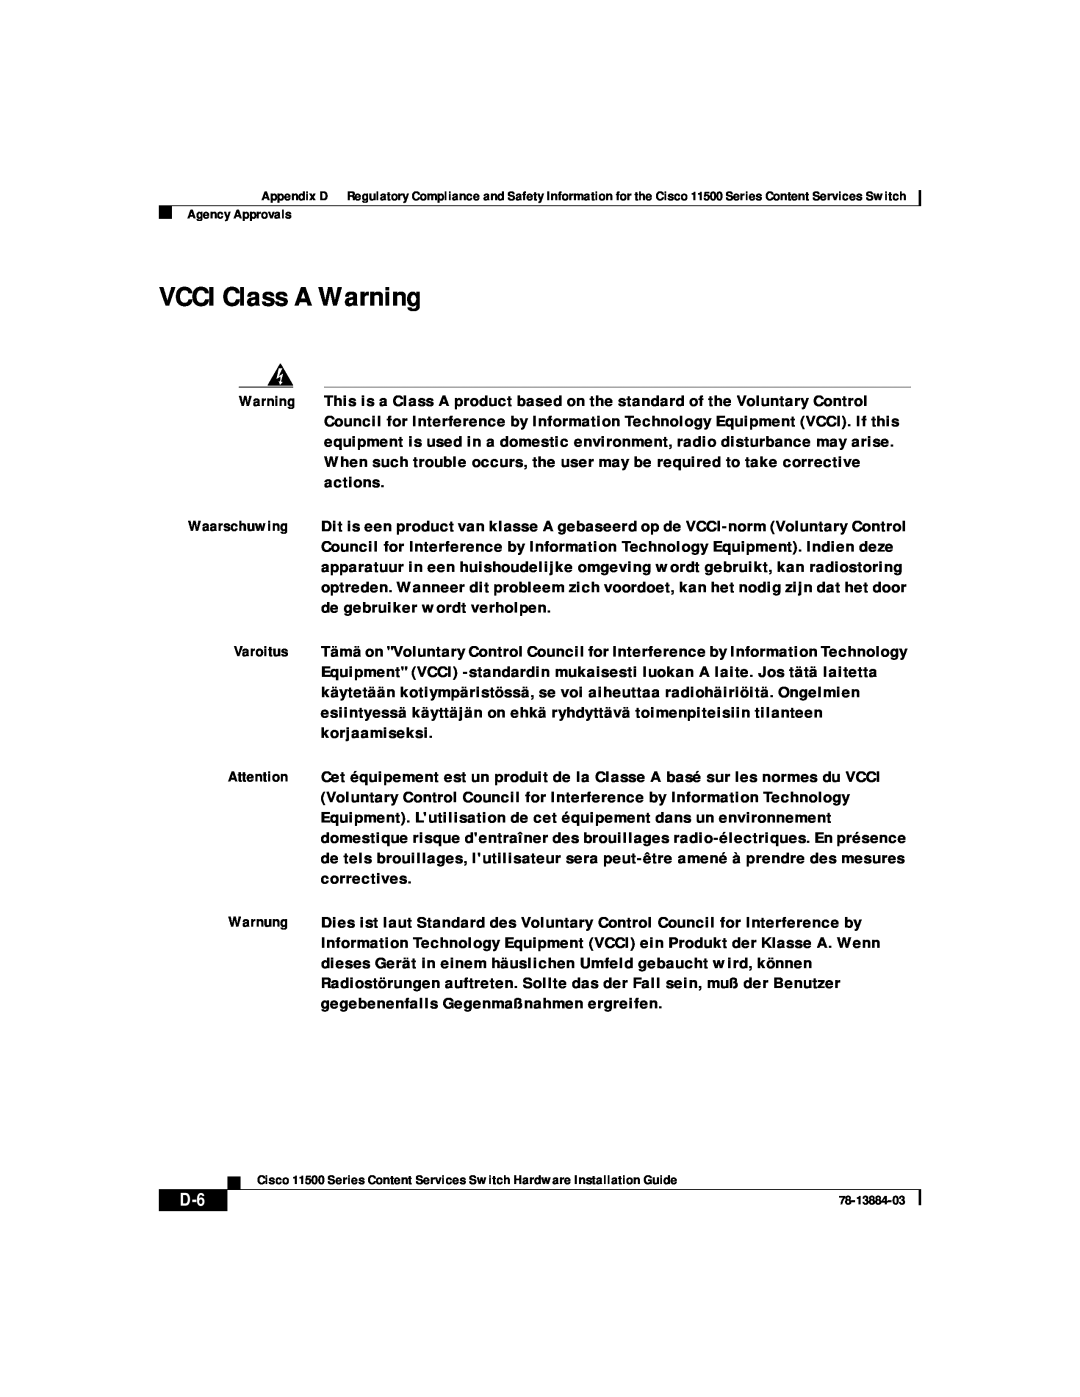 Cisco Systems 11500 Series manual VCCI Class A Warning 